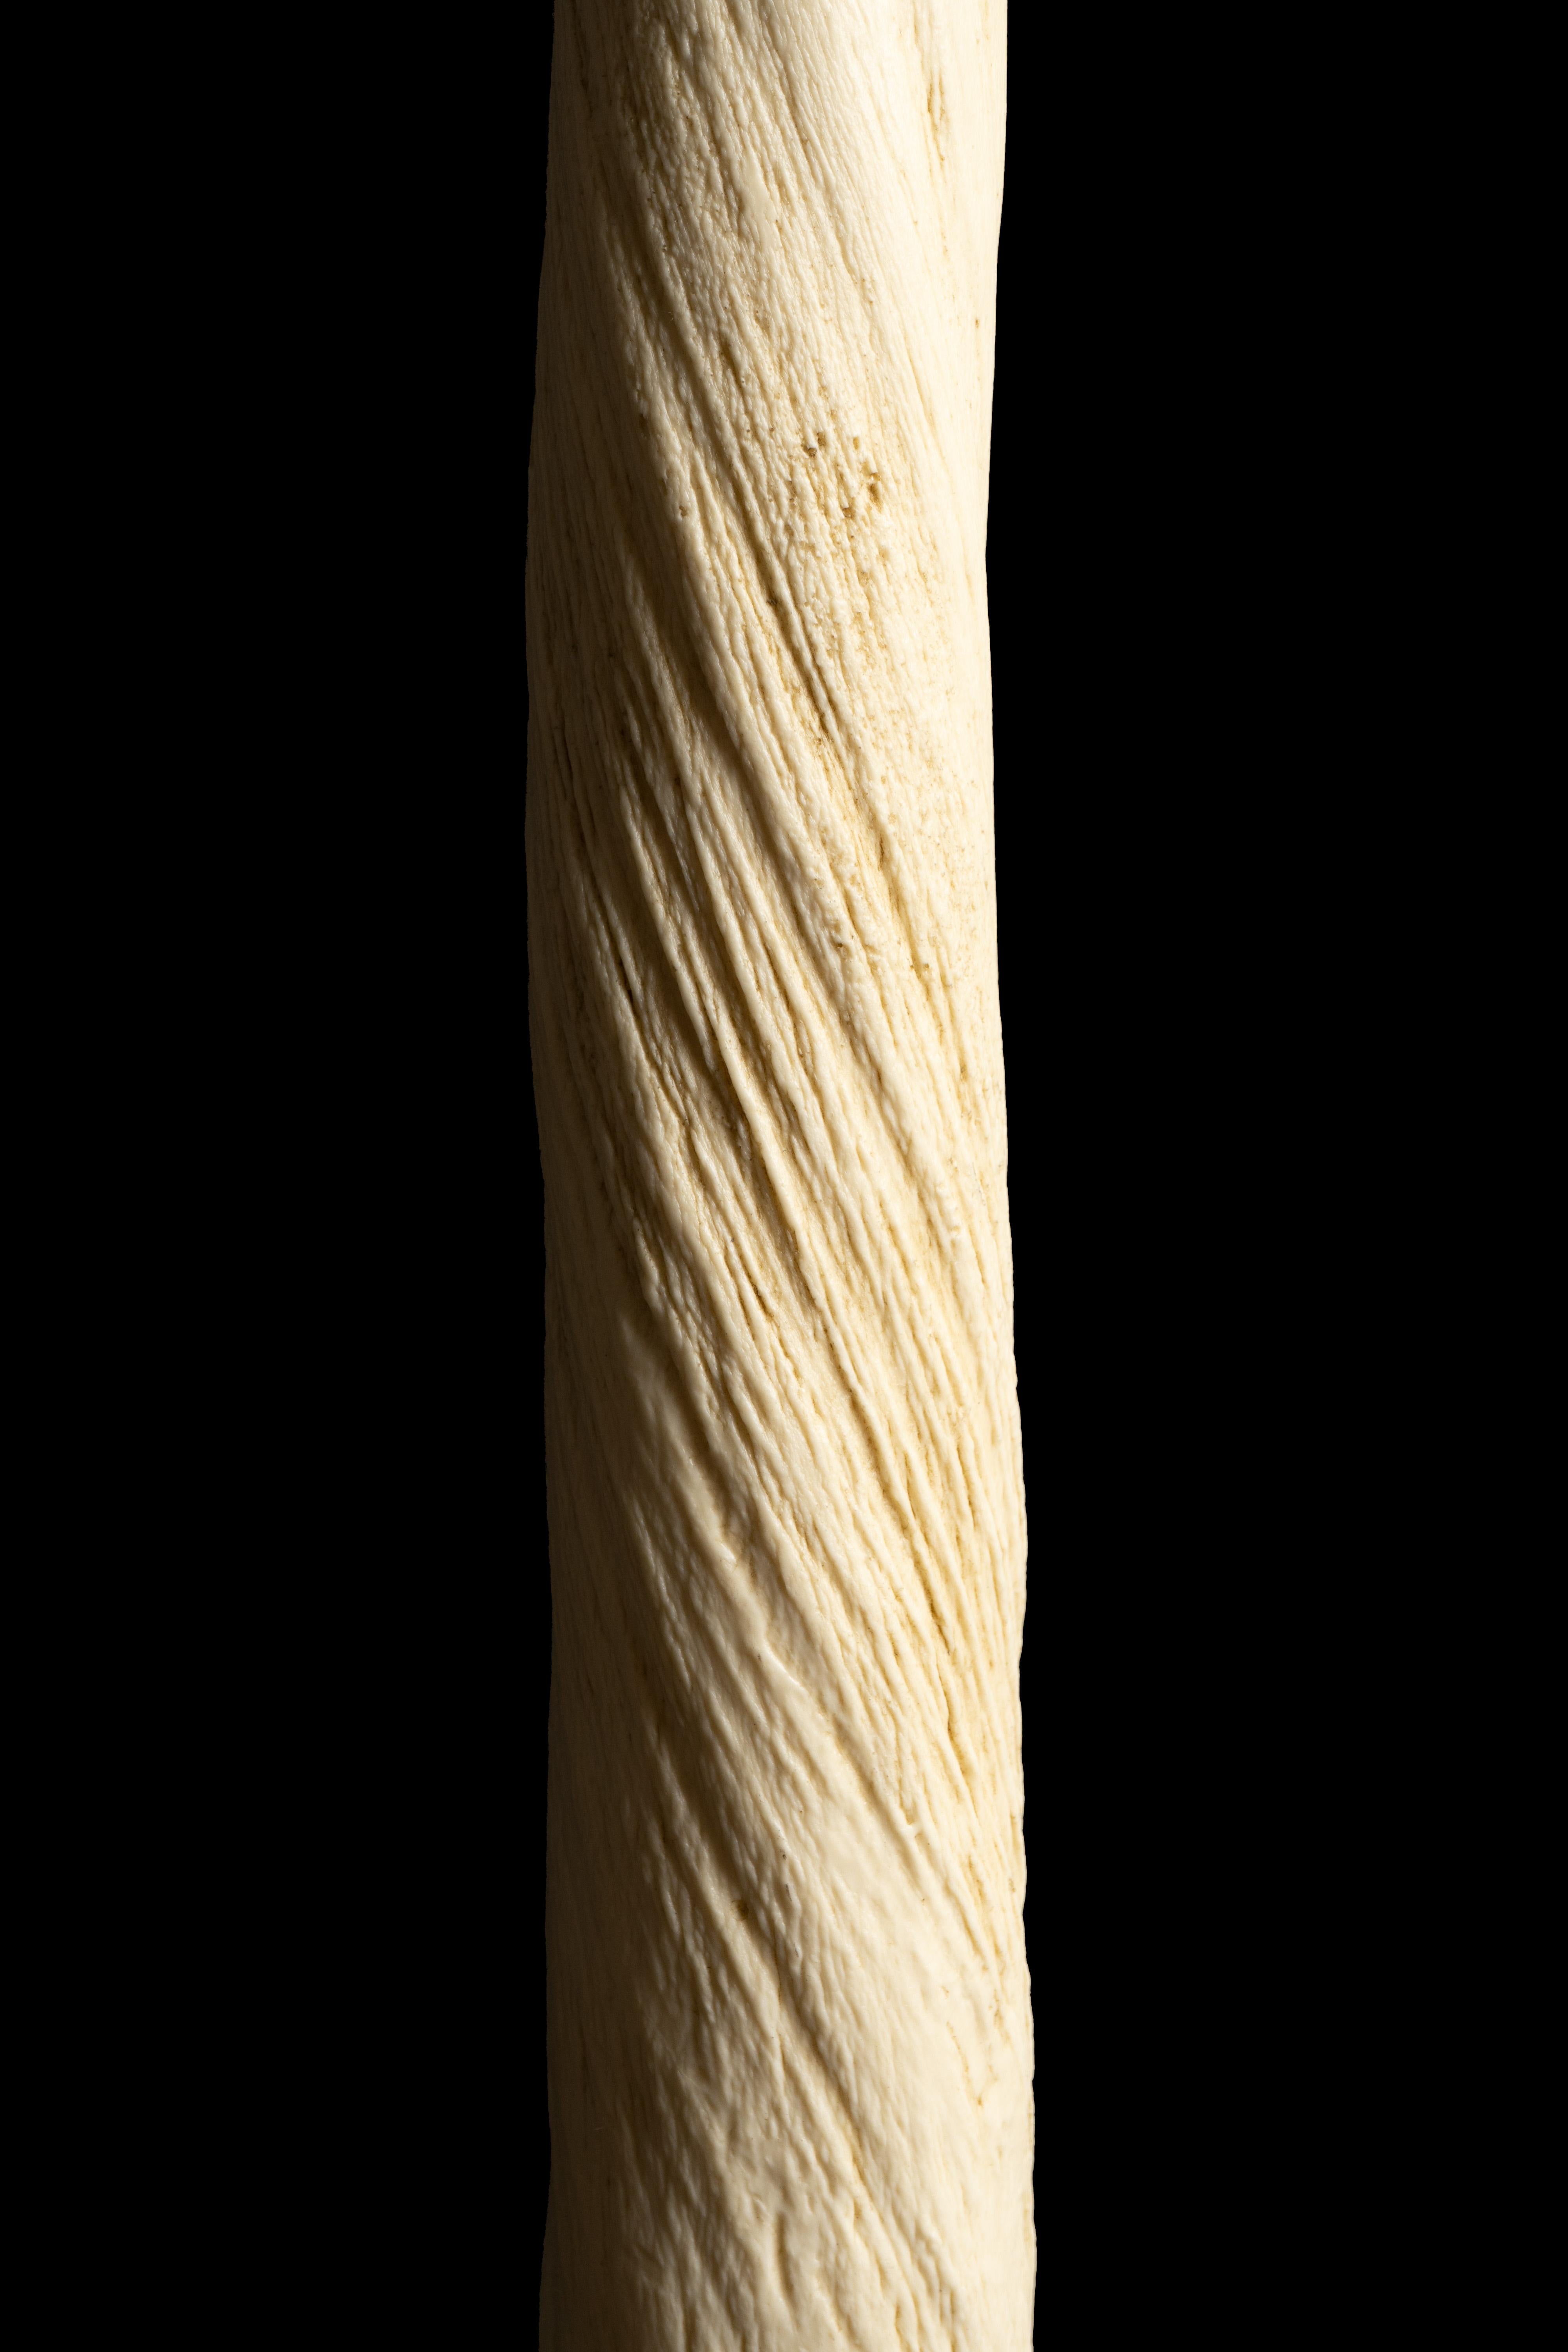 narwhal tusk size